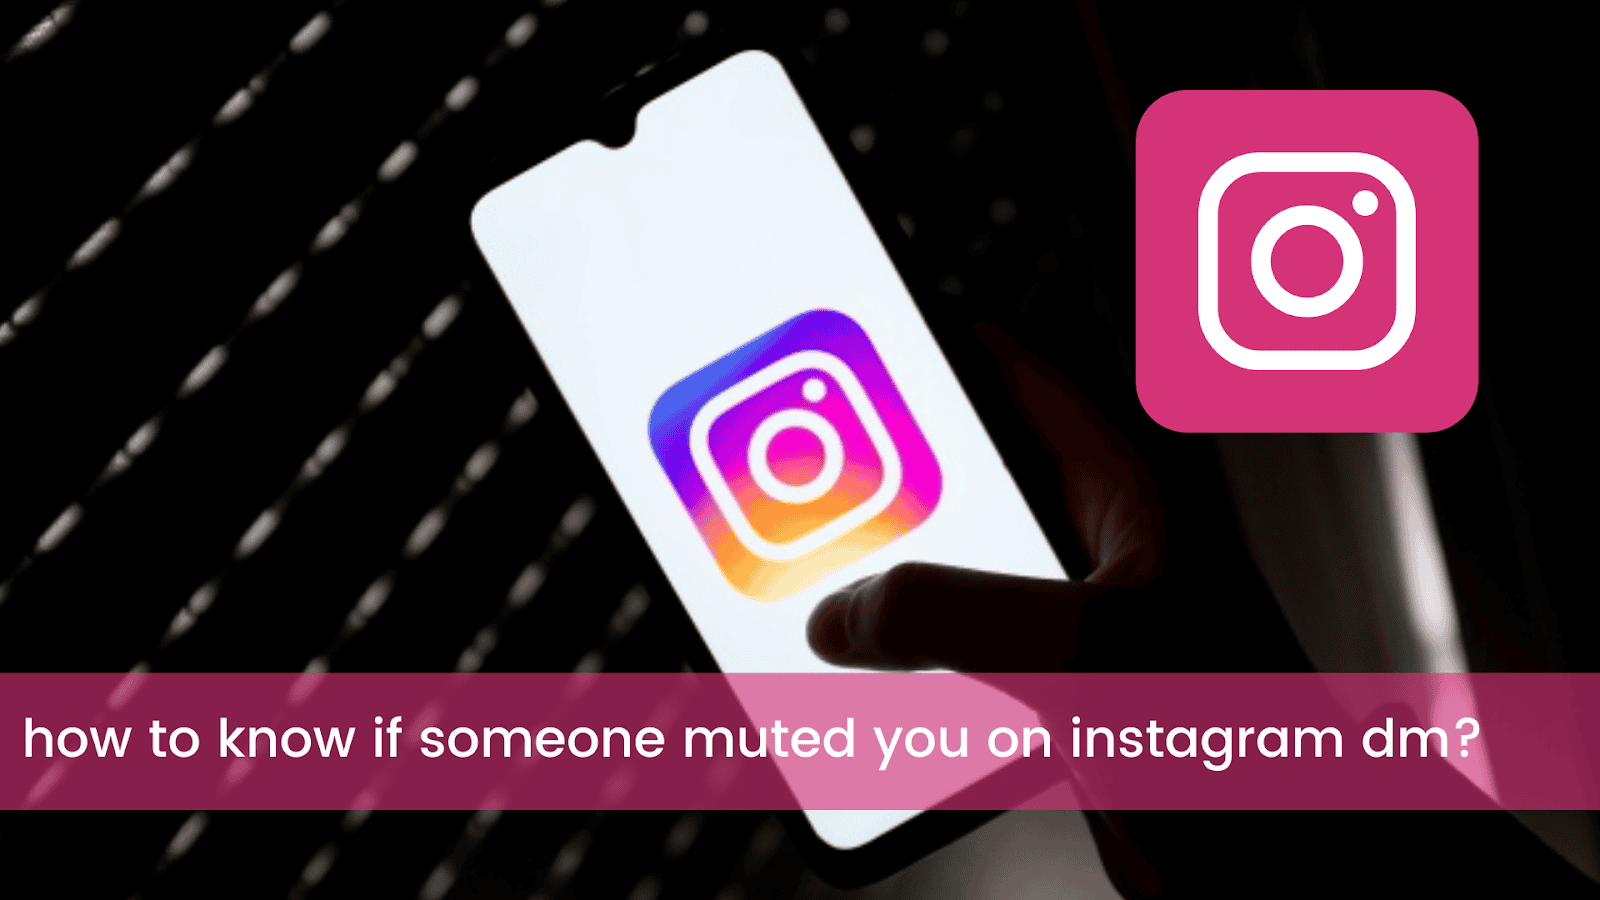 image 63 How To Know If Someone Muted You On Instagram Dm?